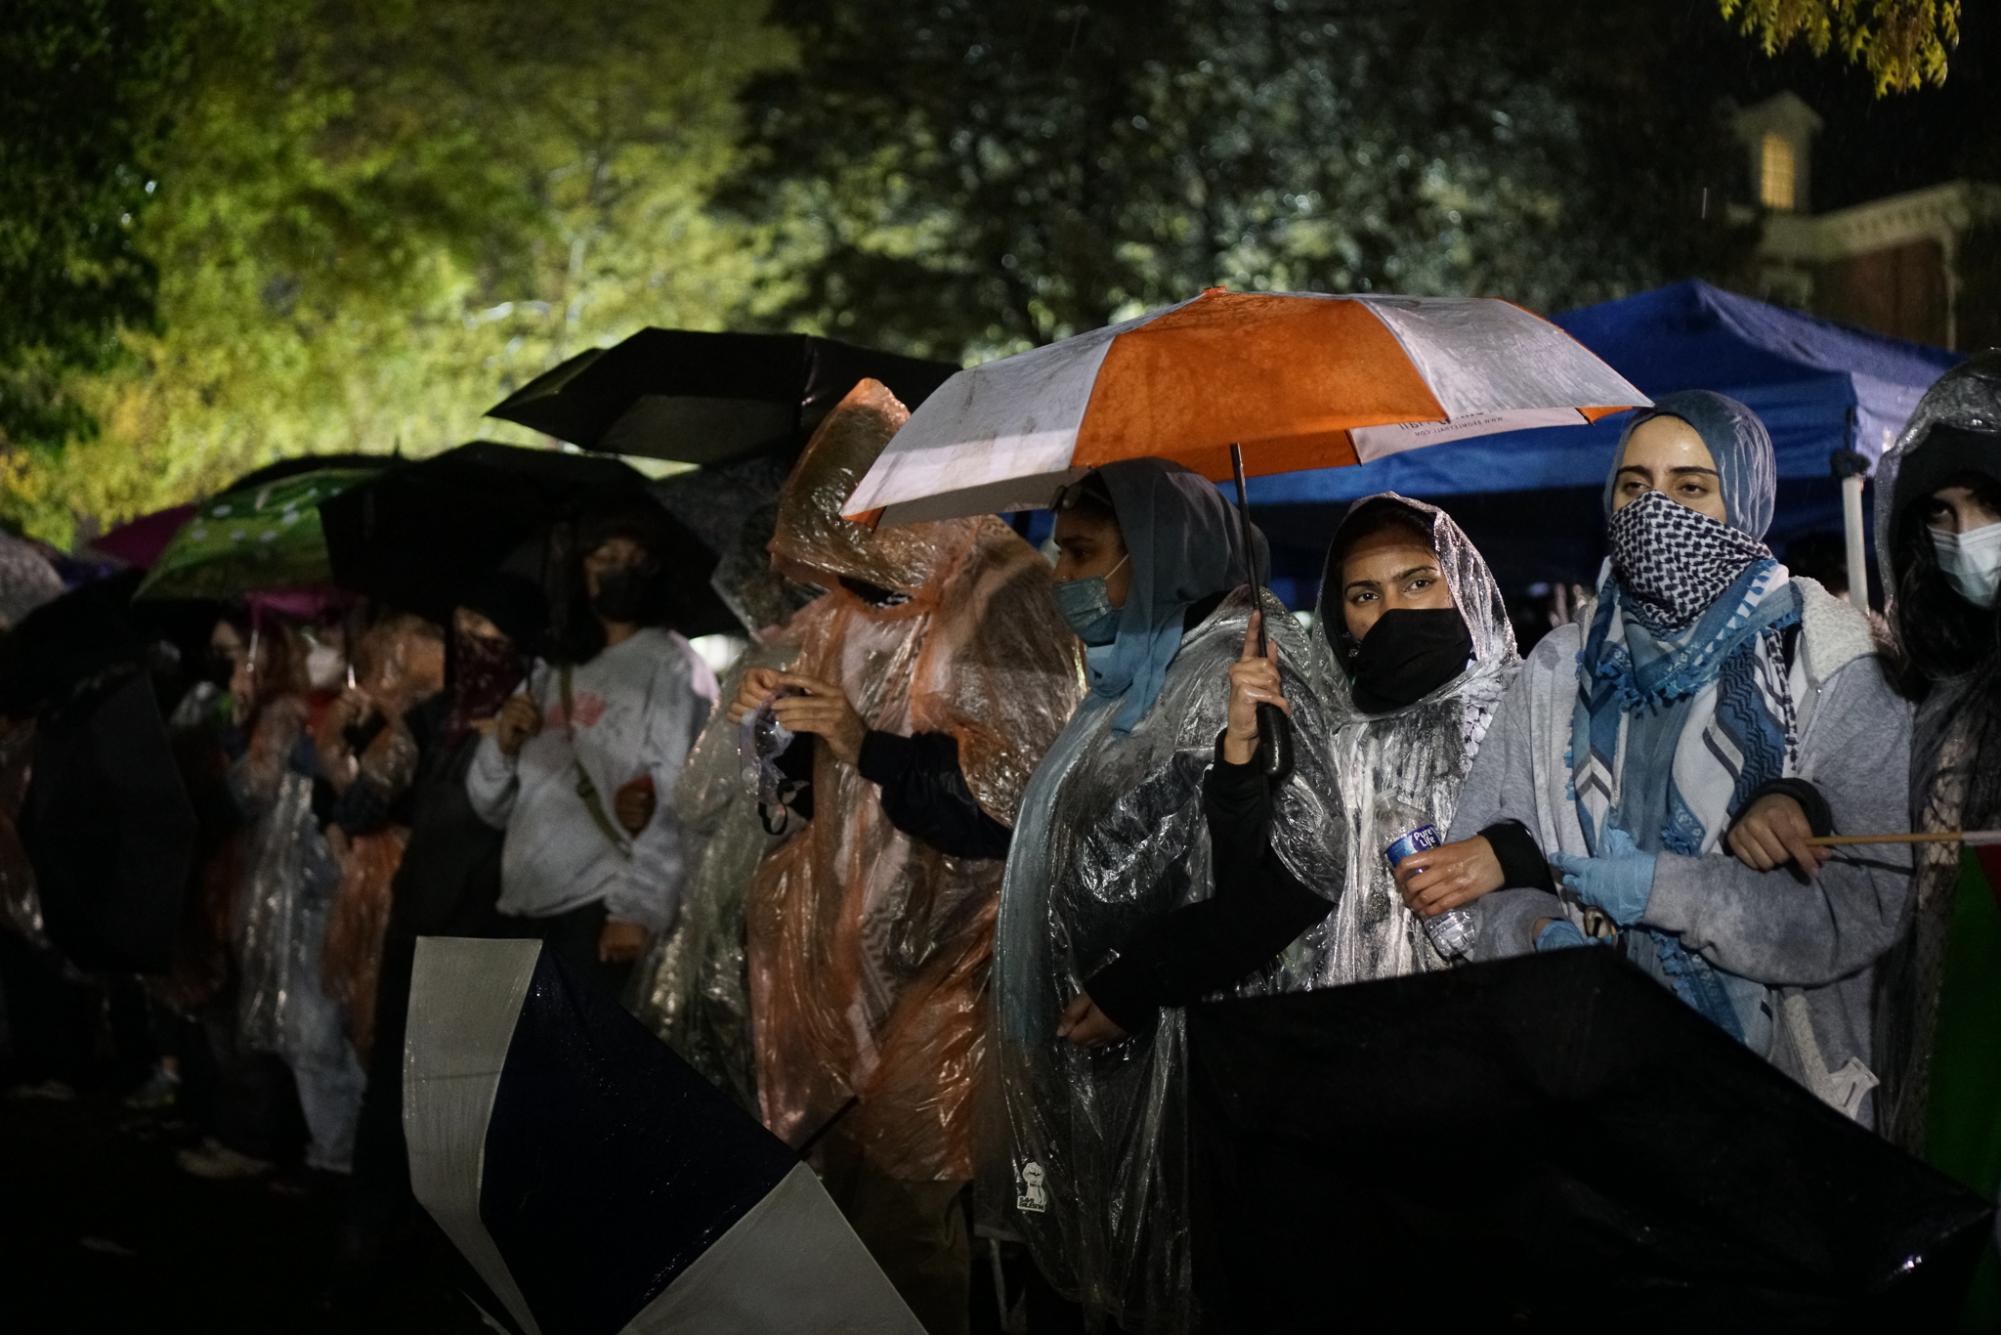 Protesters stand huddled under umbrellas on Friday night.